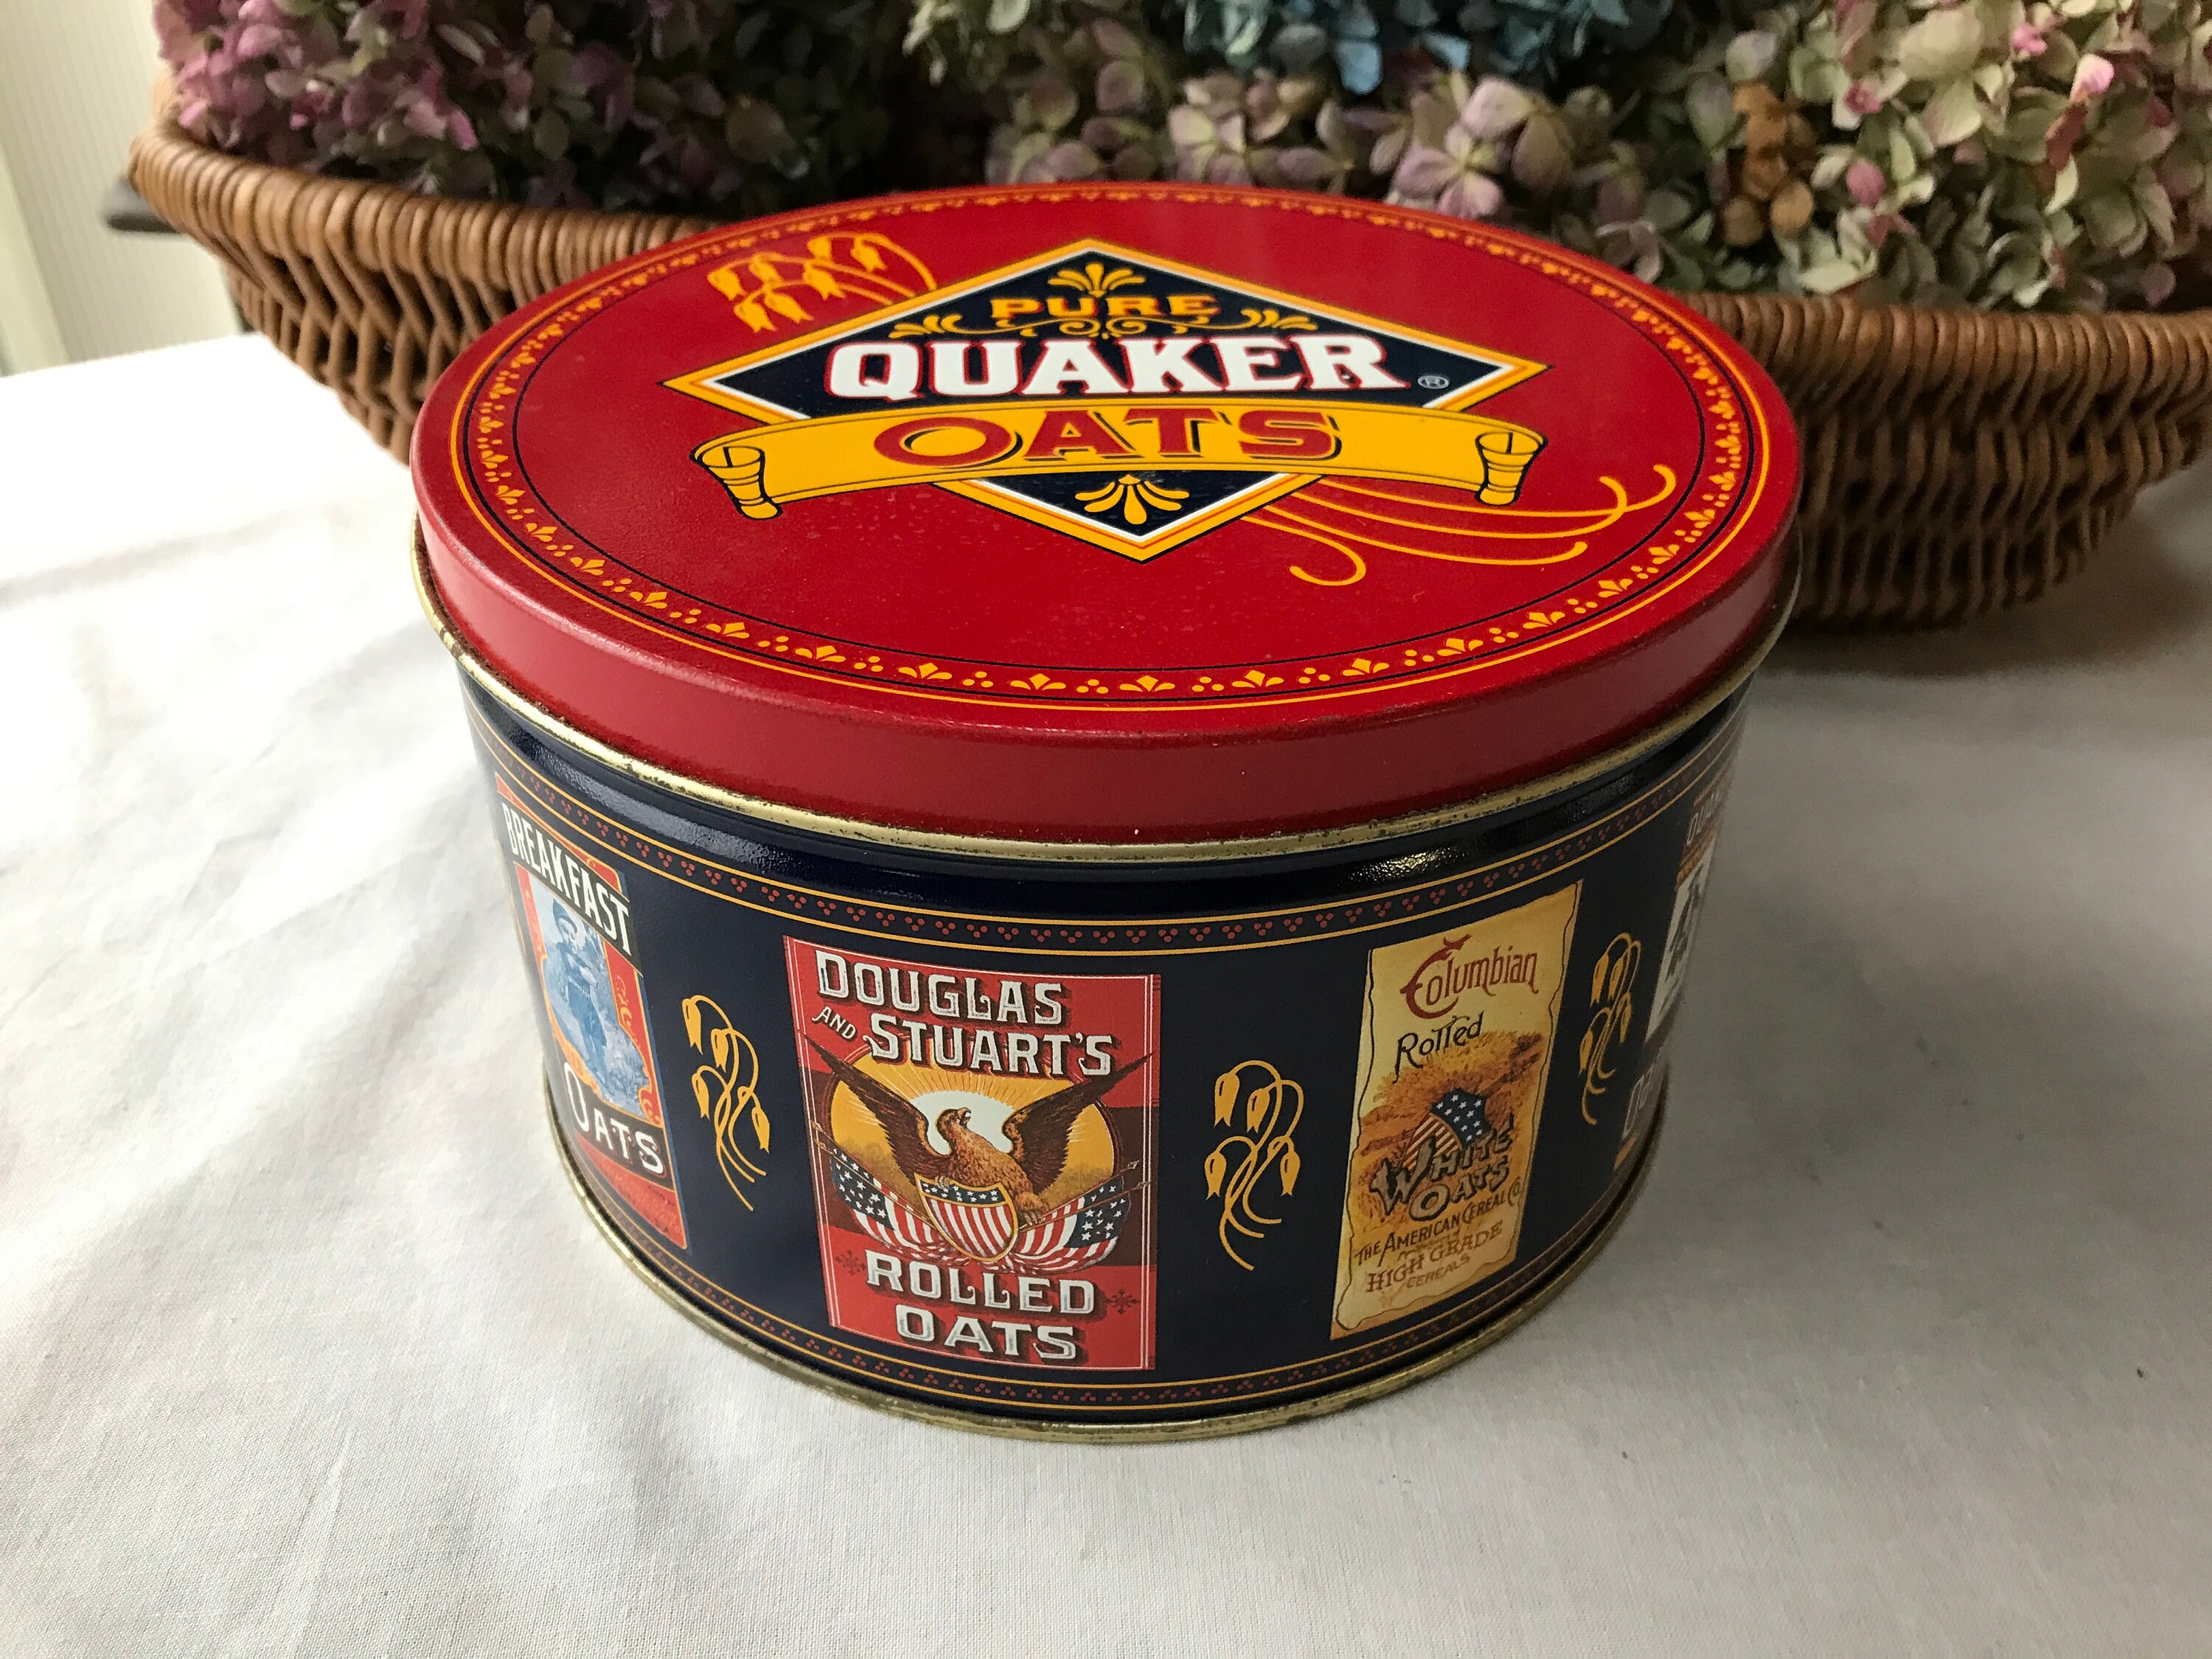 COLLECTION OF 3 QUAKER OATS CONTAINER - BOX VINTAGE & 1922 REPLICA LABEL